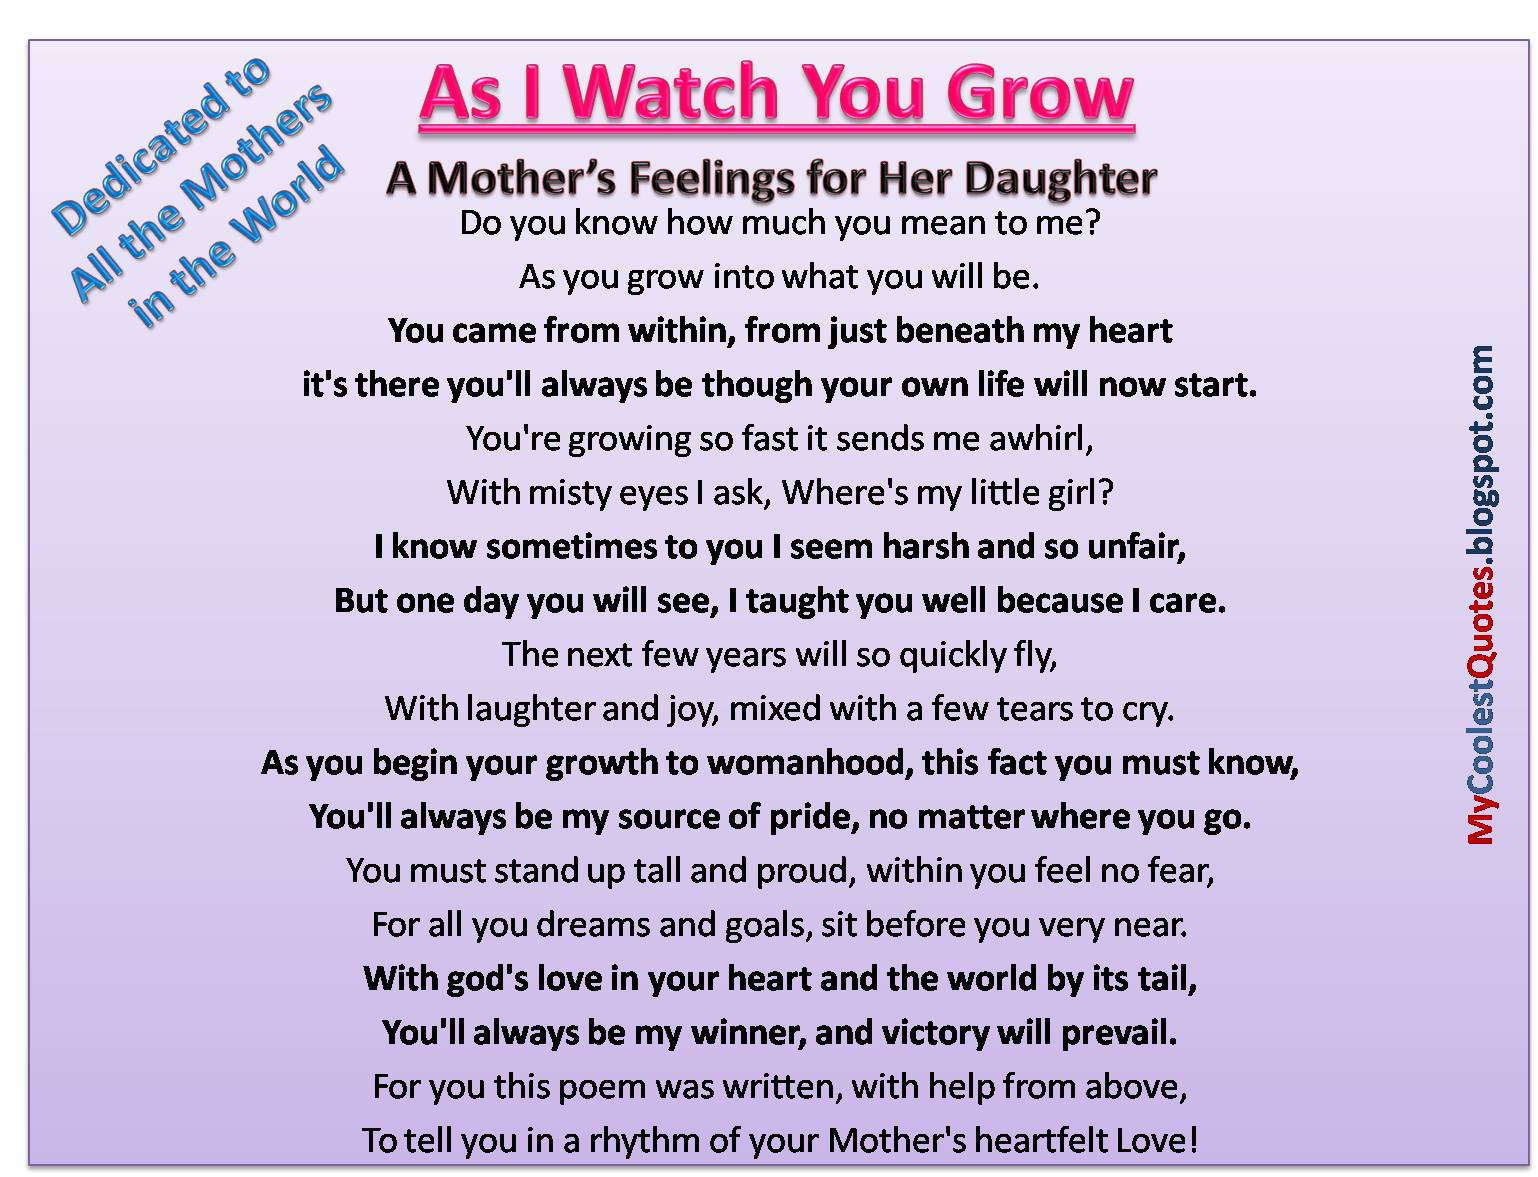 Quotes From Mother To Daughter
 My Coolest Quotes A Mother s Feelings for Her Daughter